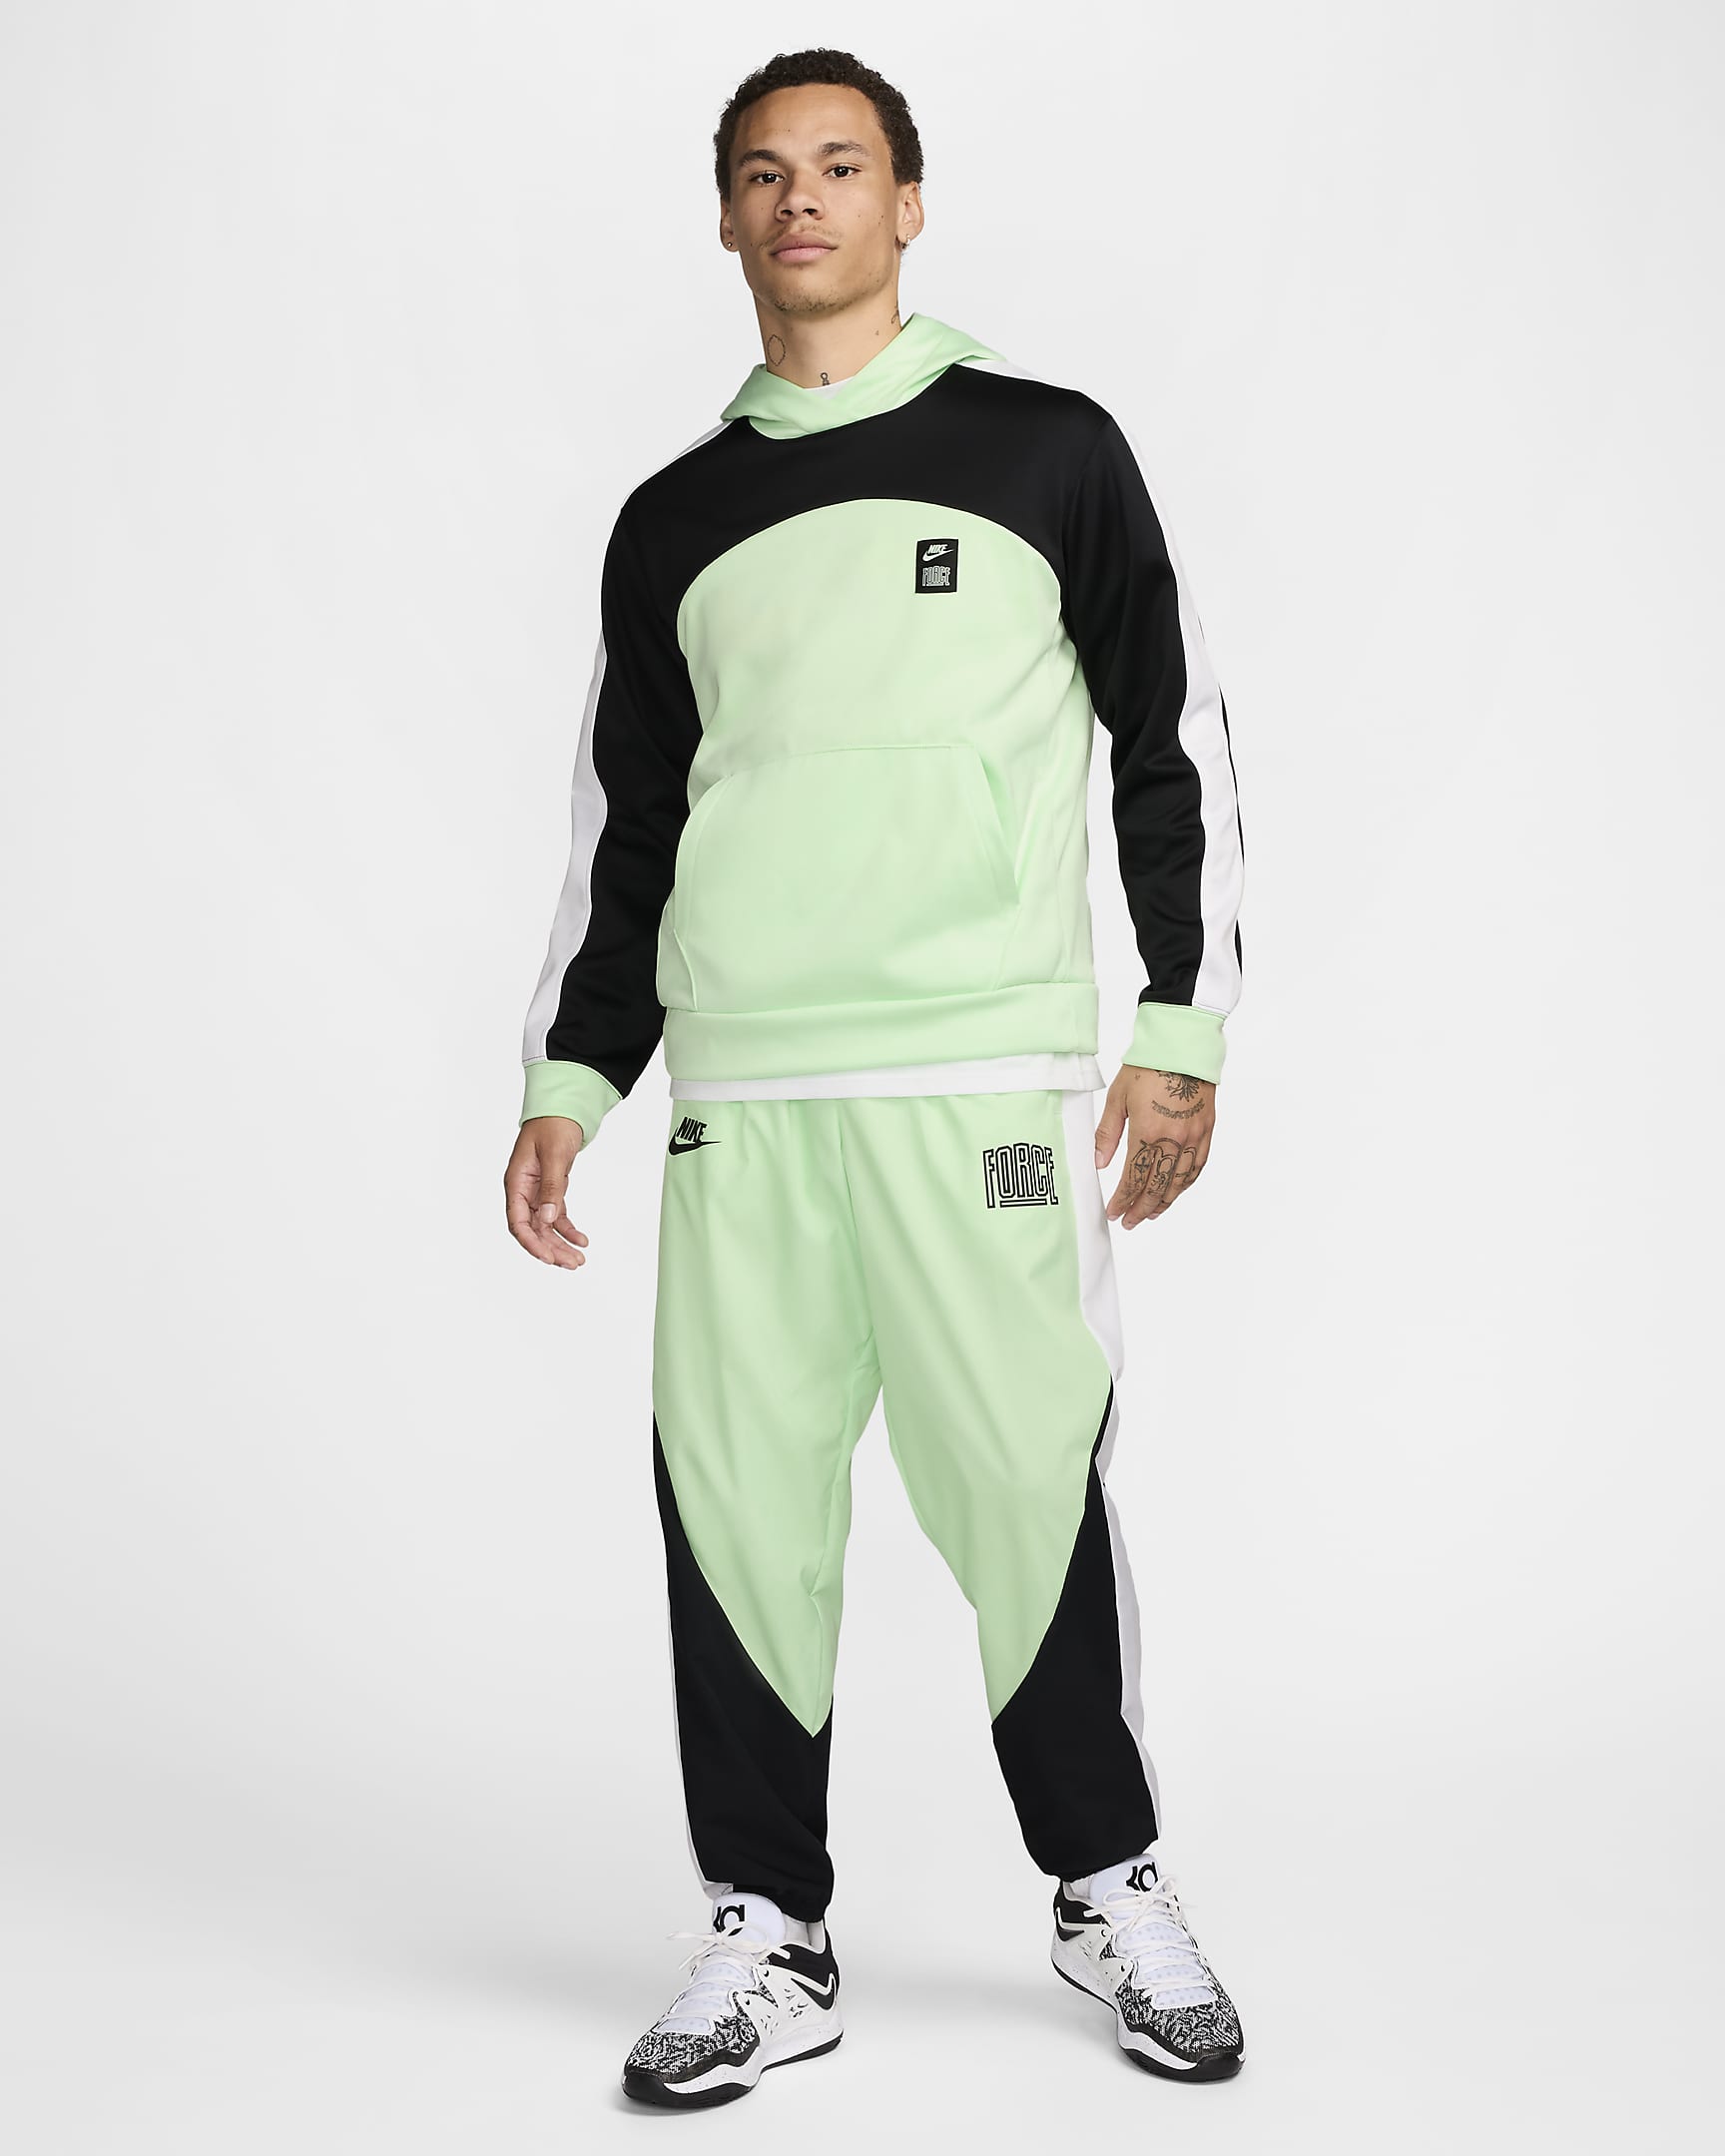 Nike Starting 5 Men's Therma-FIT Basketball Hoodie - Vapour Green/Black/White/Vapour Green